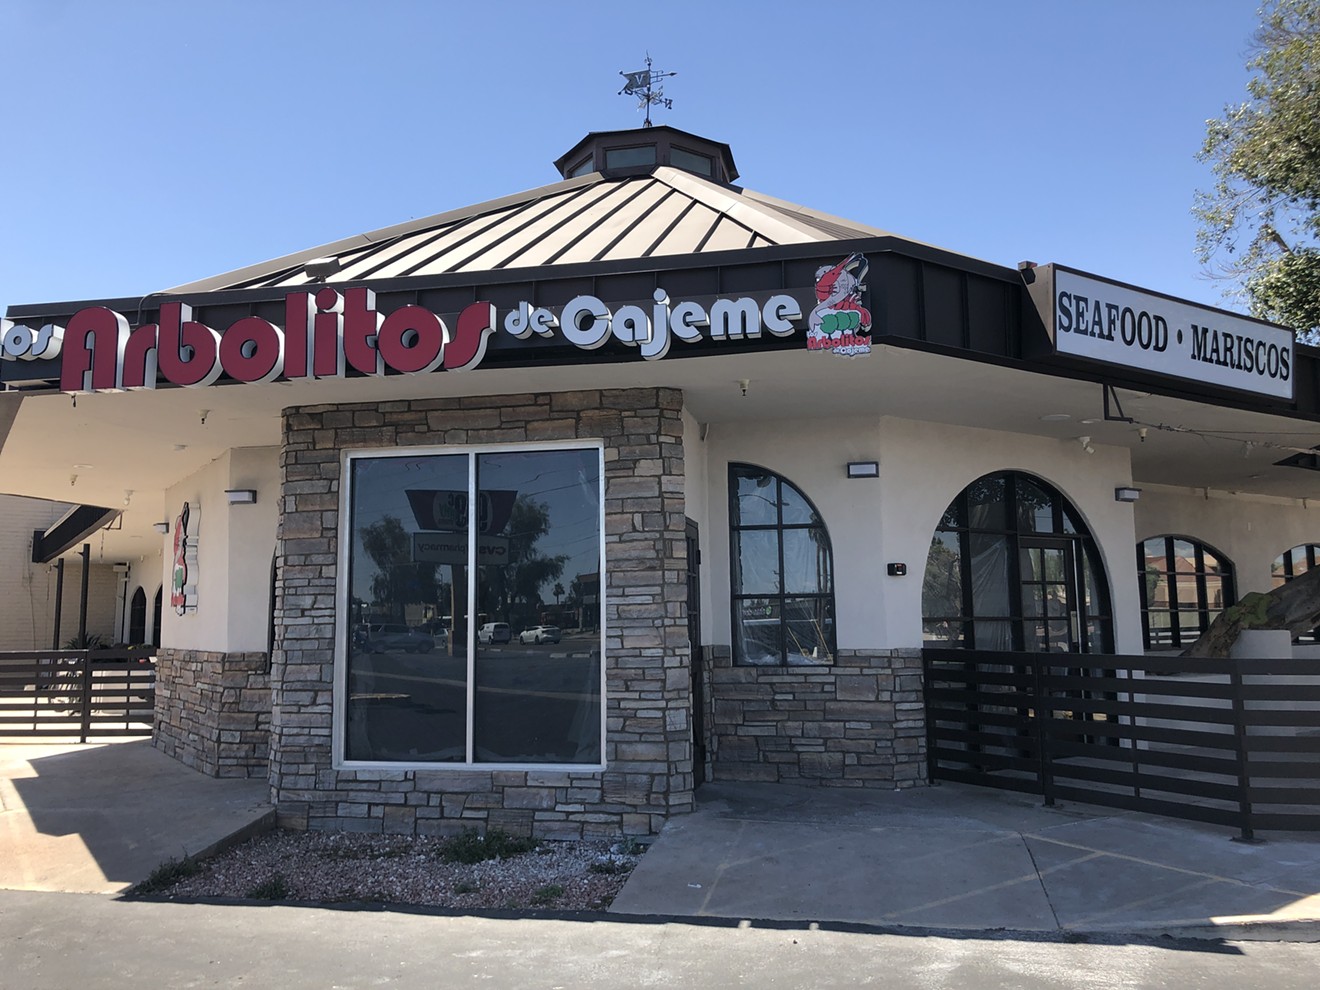 Los Arbolitos de Cajeme will be opening at 35th and Peoria avenues.